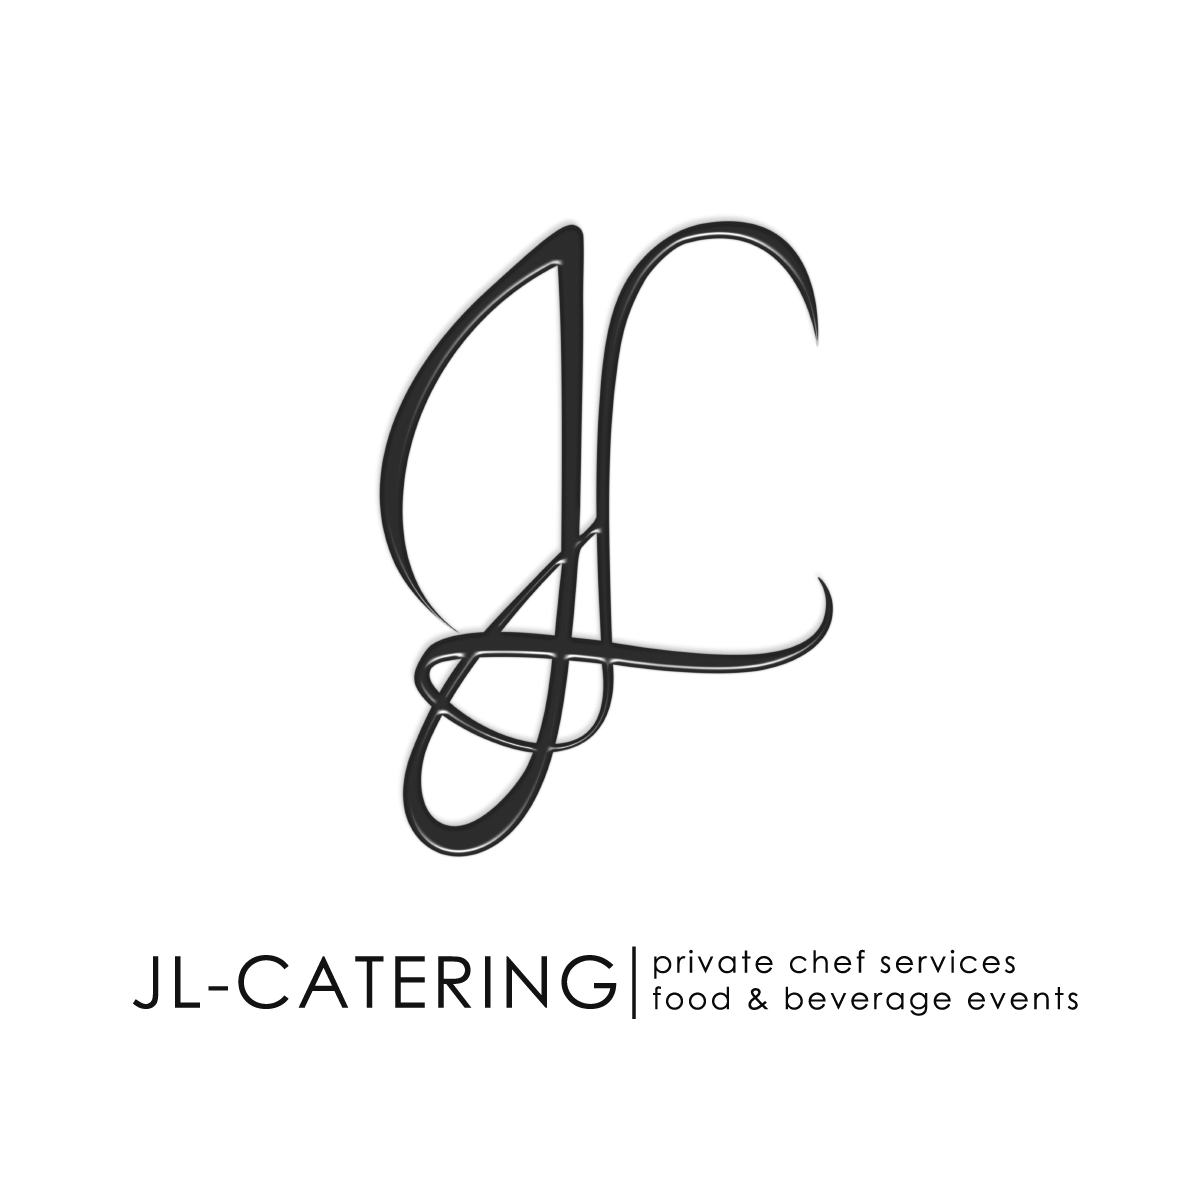 JL-catering